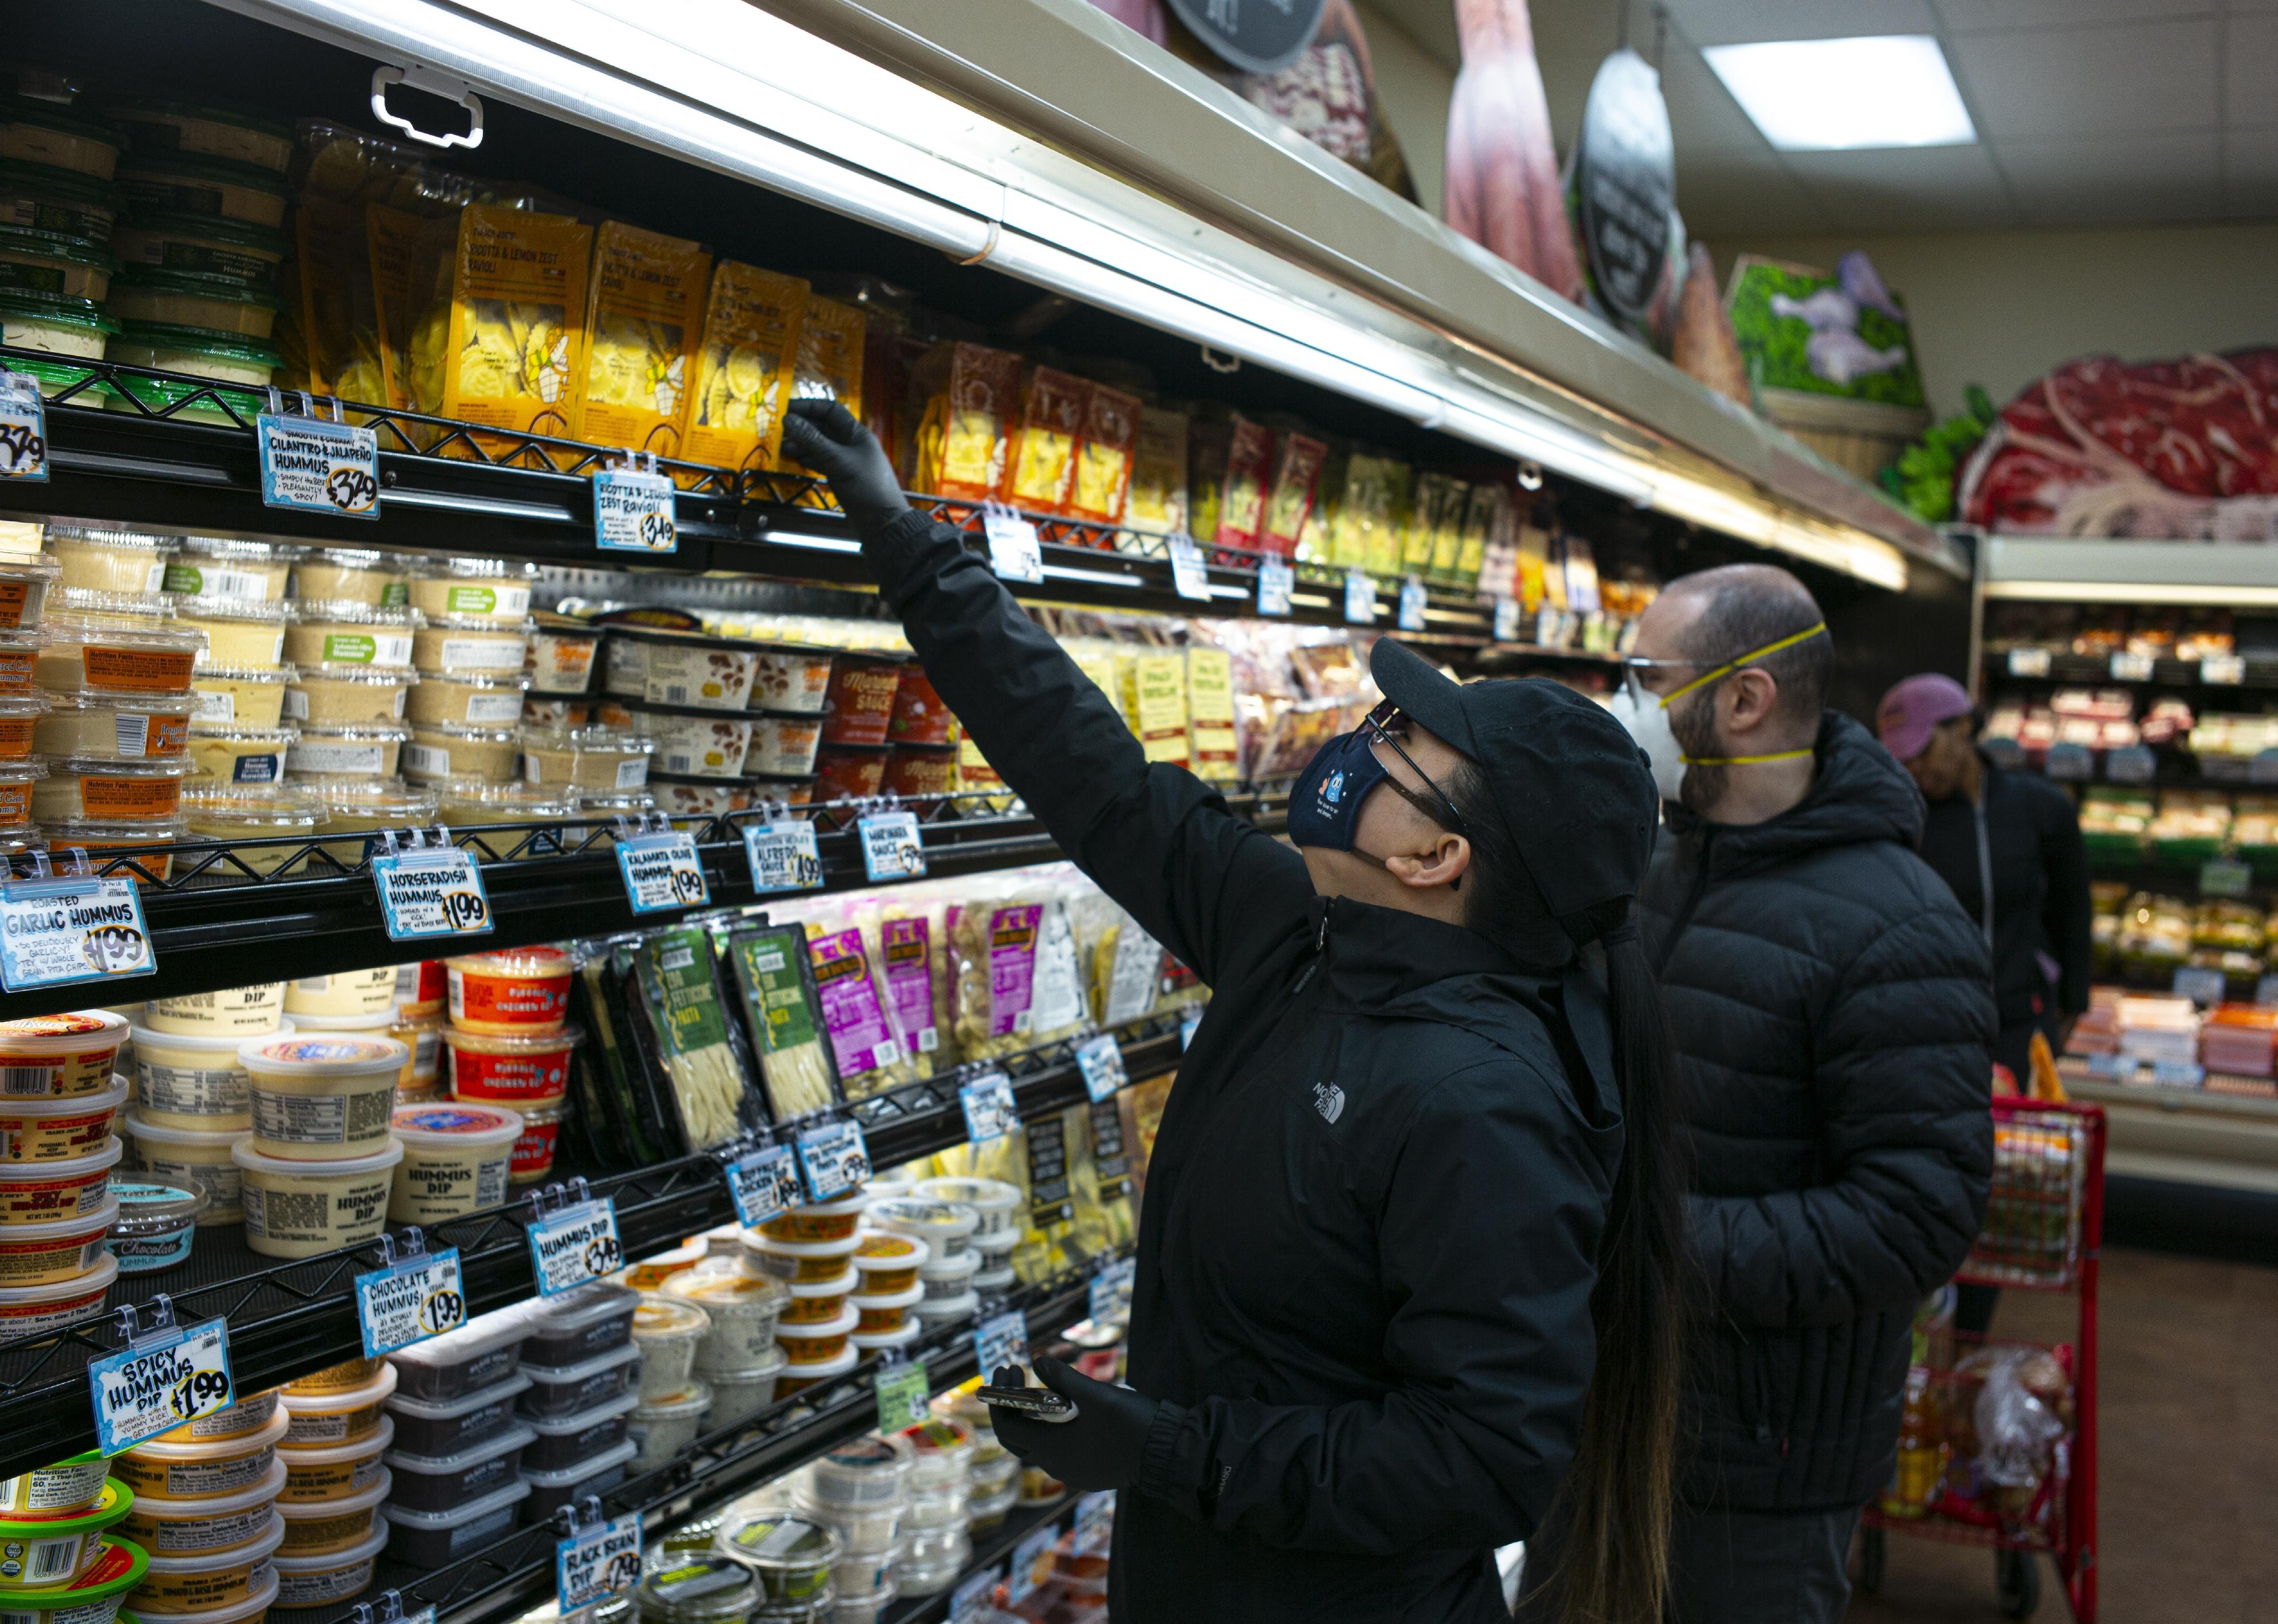 People wearing masks shop for groceries in the supermarket.